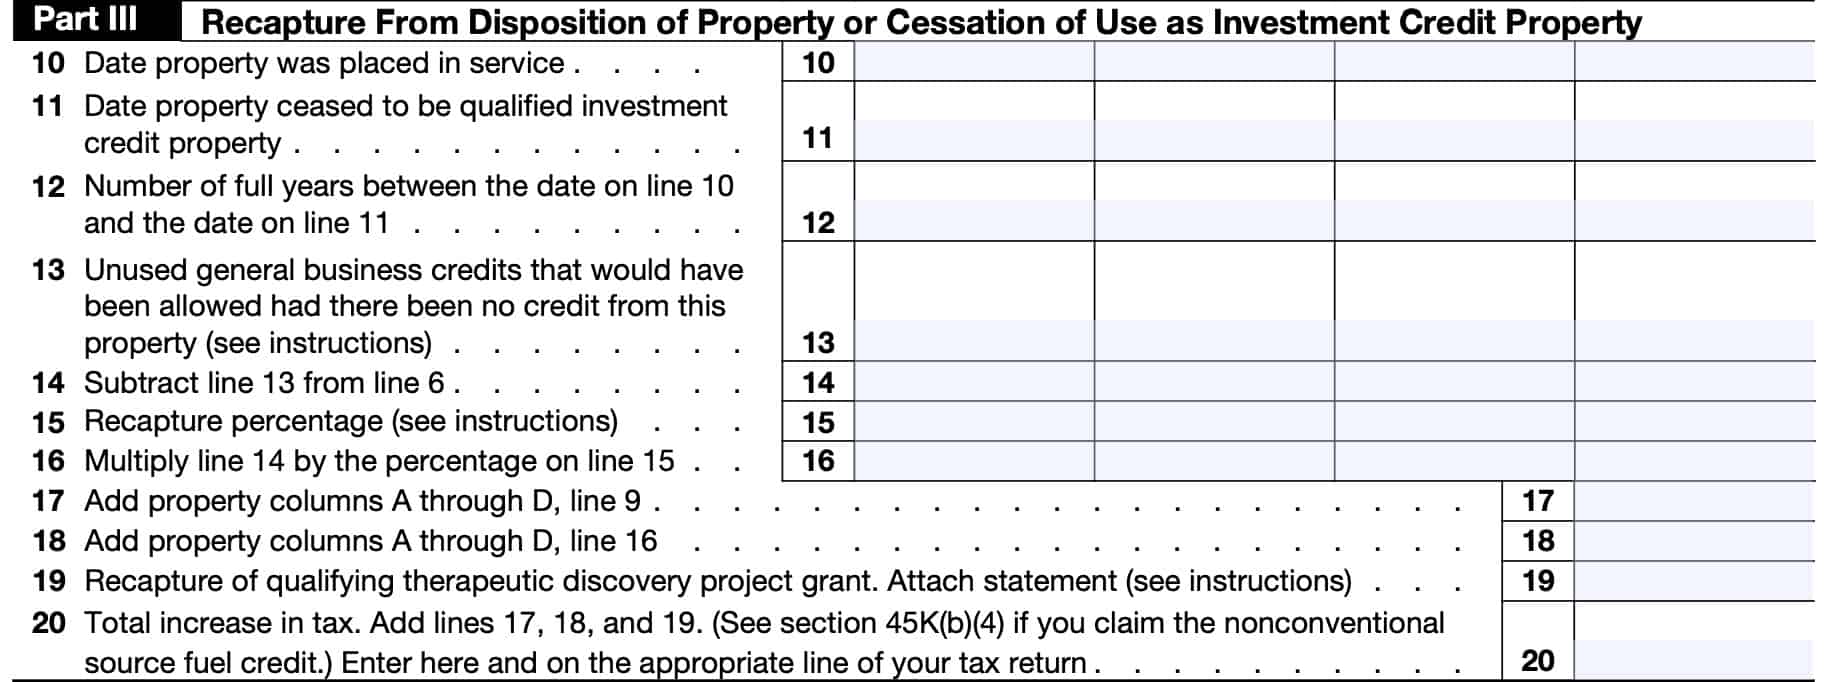 irs form 4255 part iii: recapture from disposition of property or cessation of use as investment credit property